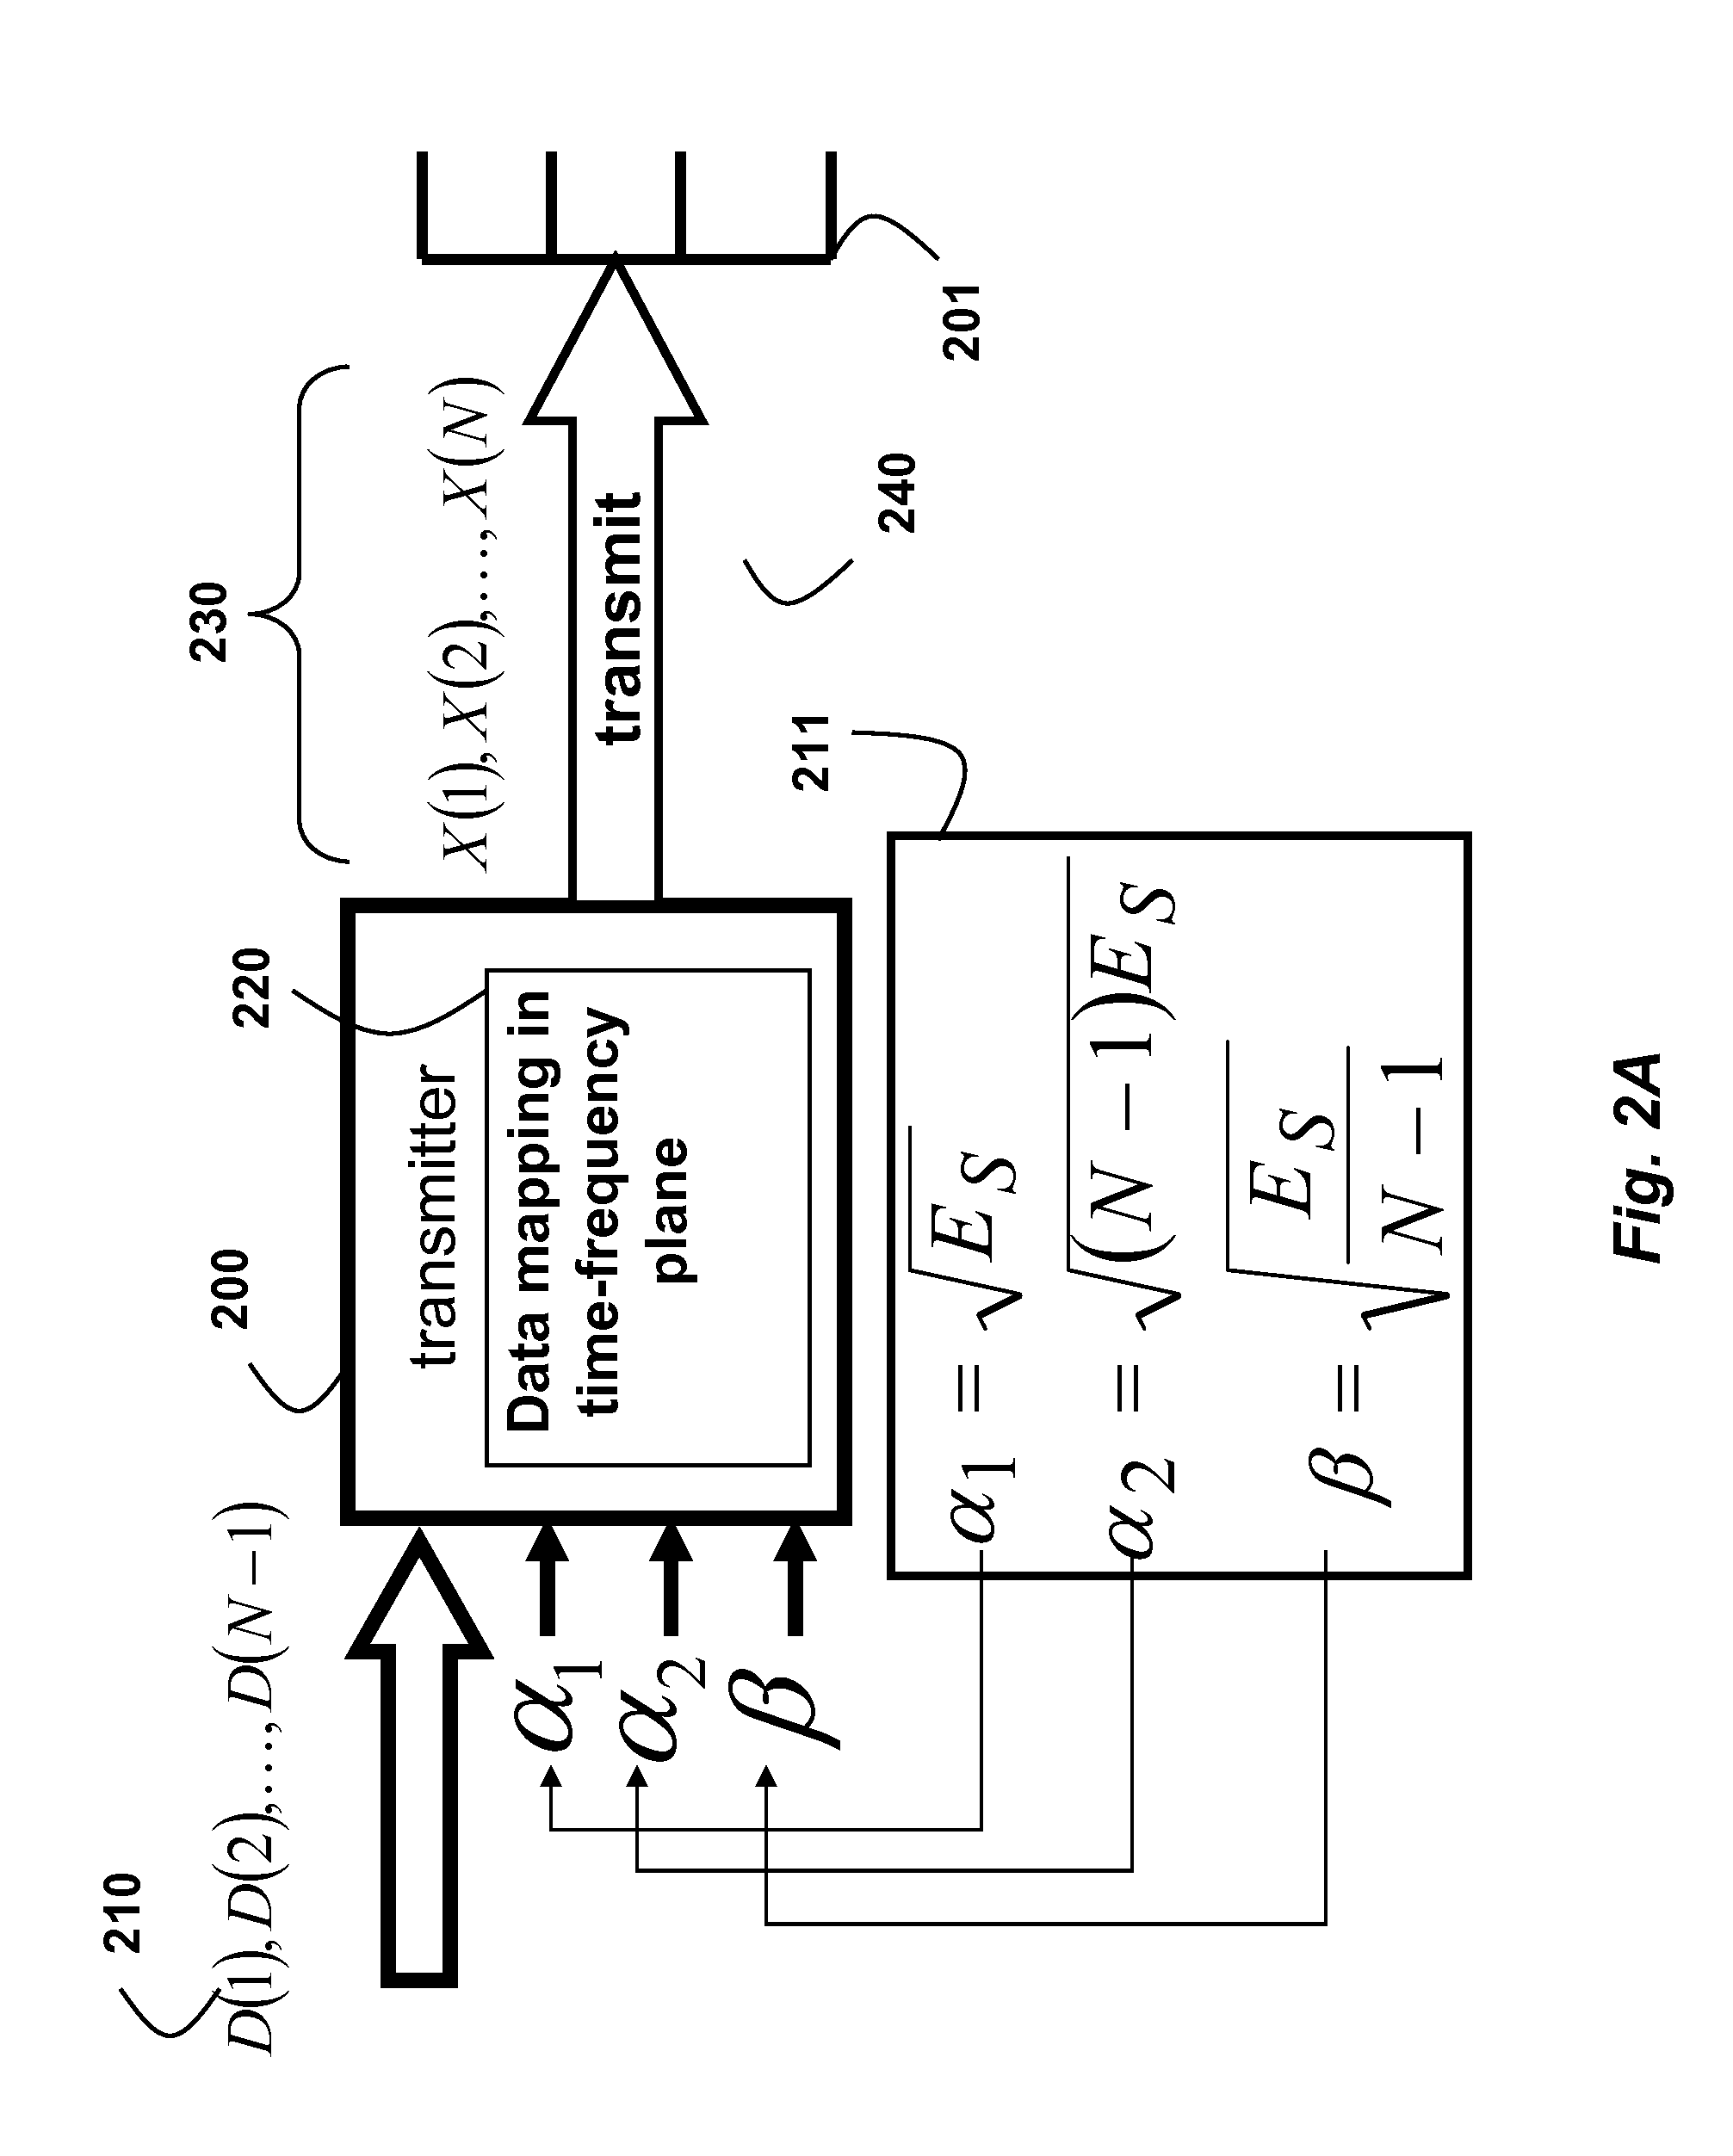 Method for Encoding Data Symbols with Implicitly Embedded Pilot Symbols in Resource Blocks for Wireless Networks